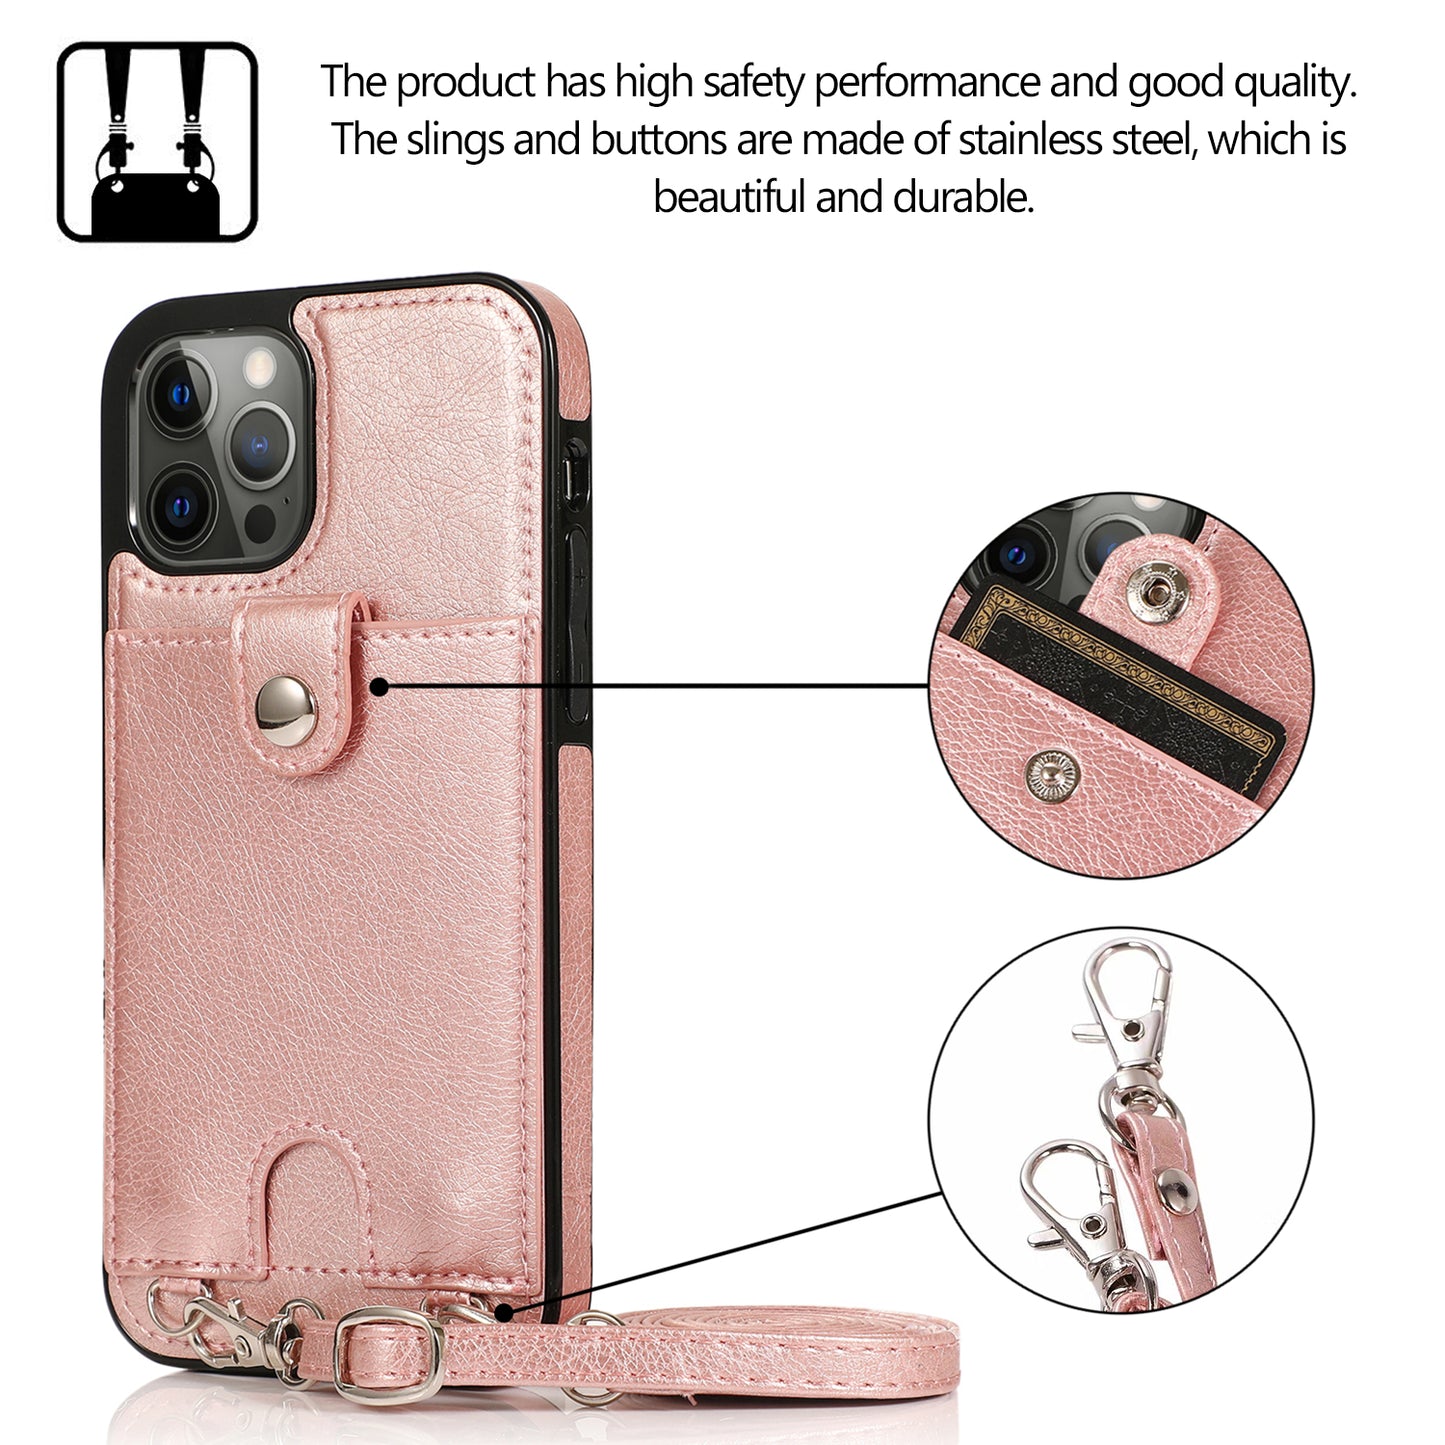 Apple iPhone 12 Pro Max Leather Cover Thin Double Usages Wallet with Shoulder Strap